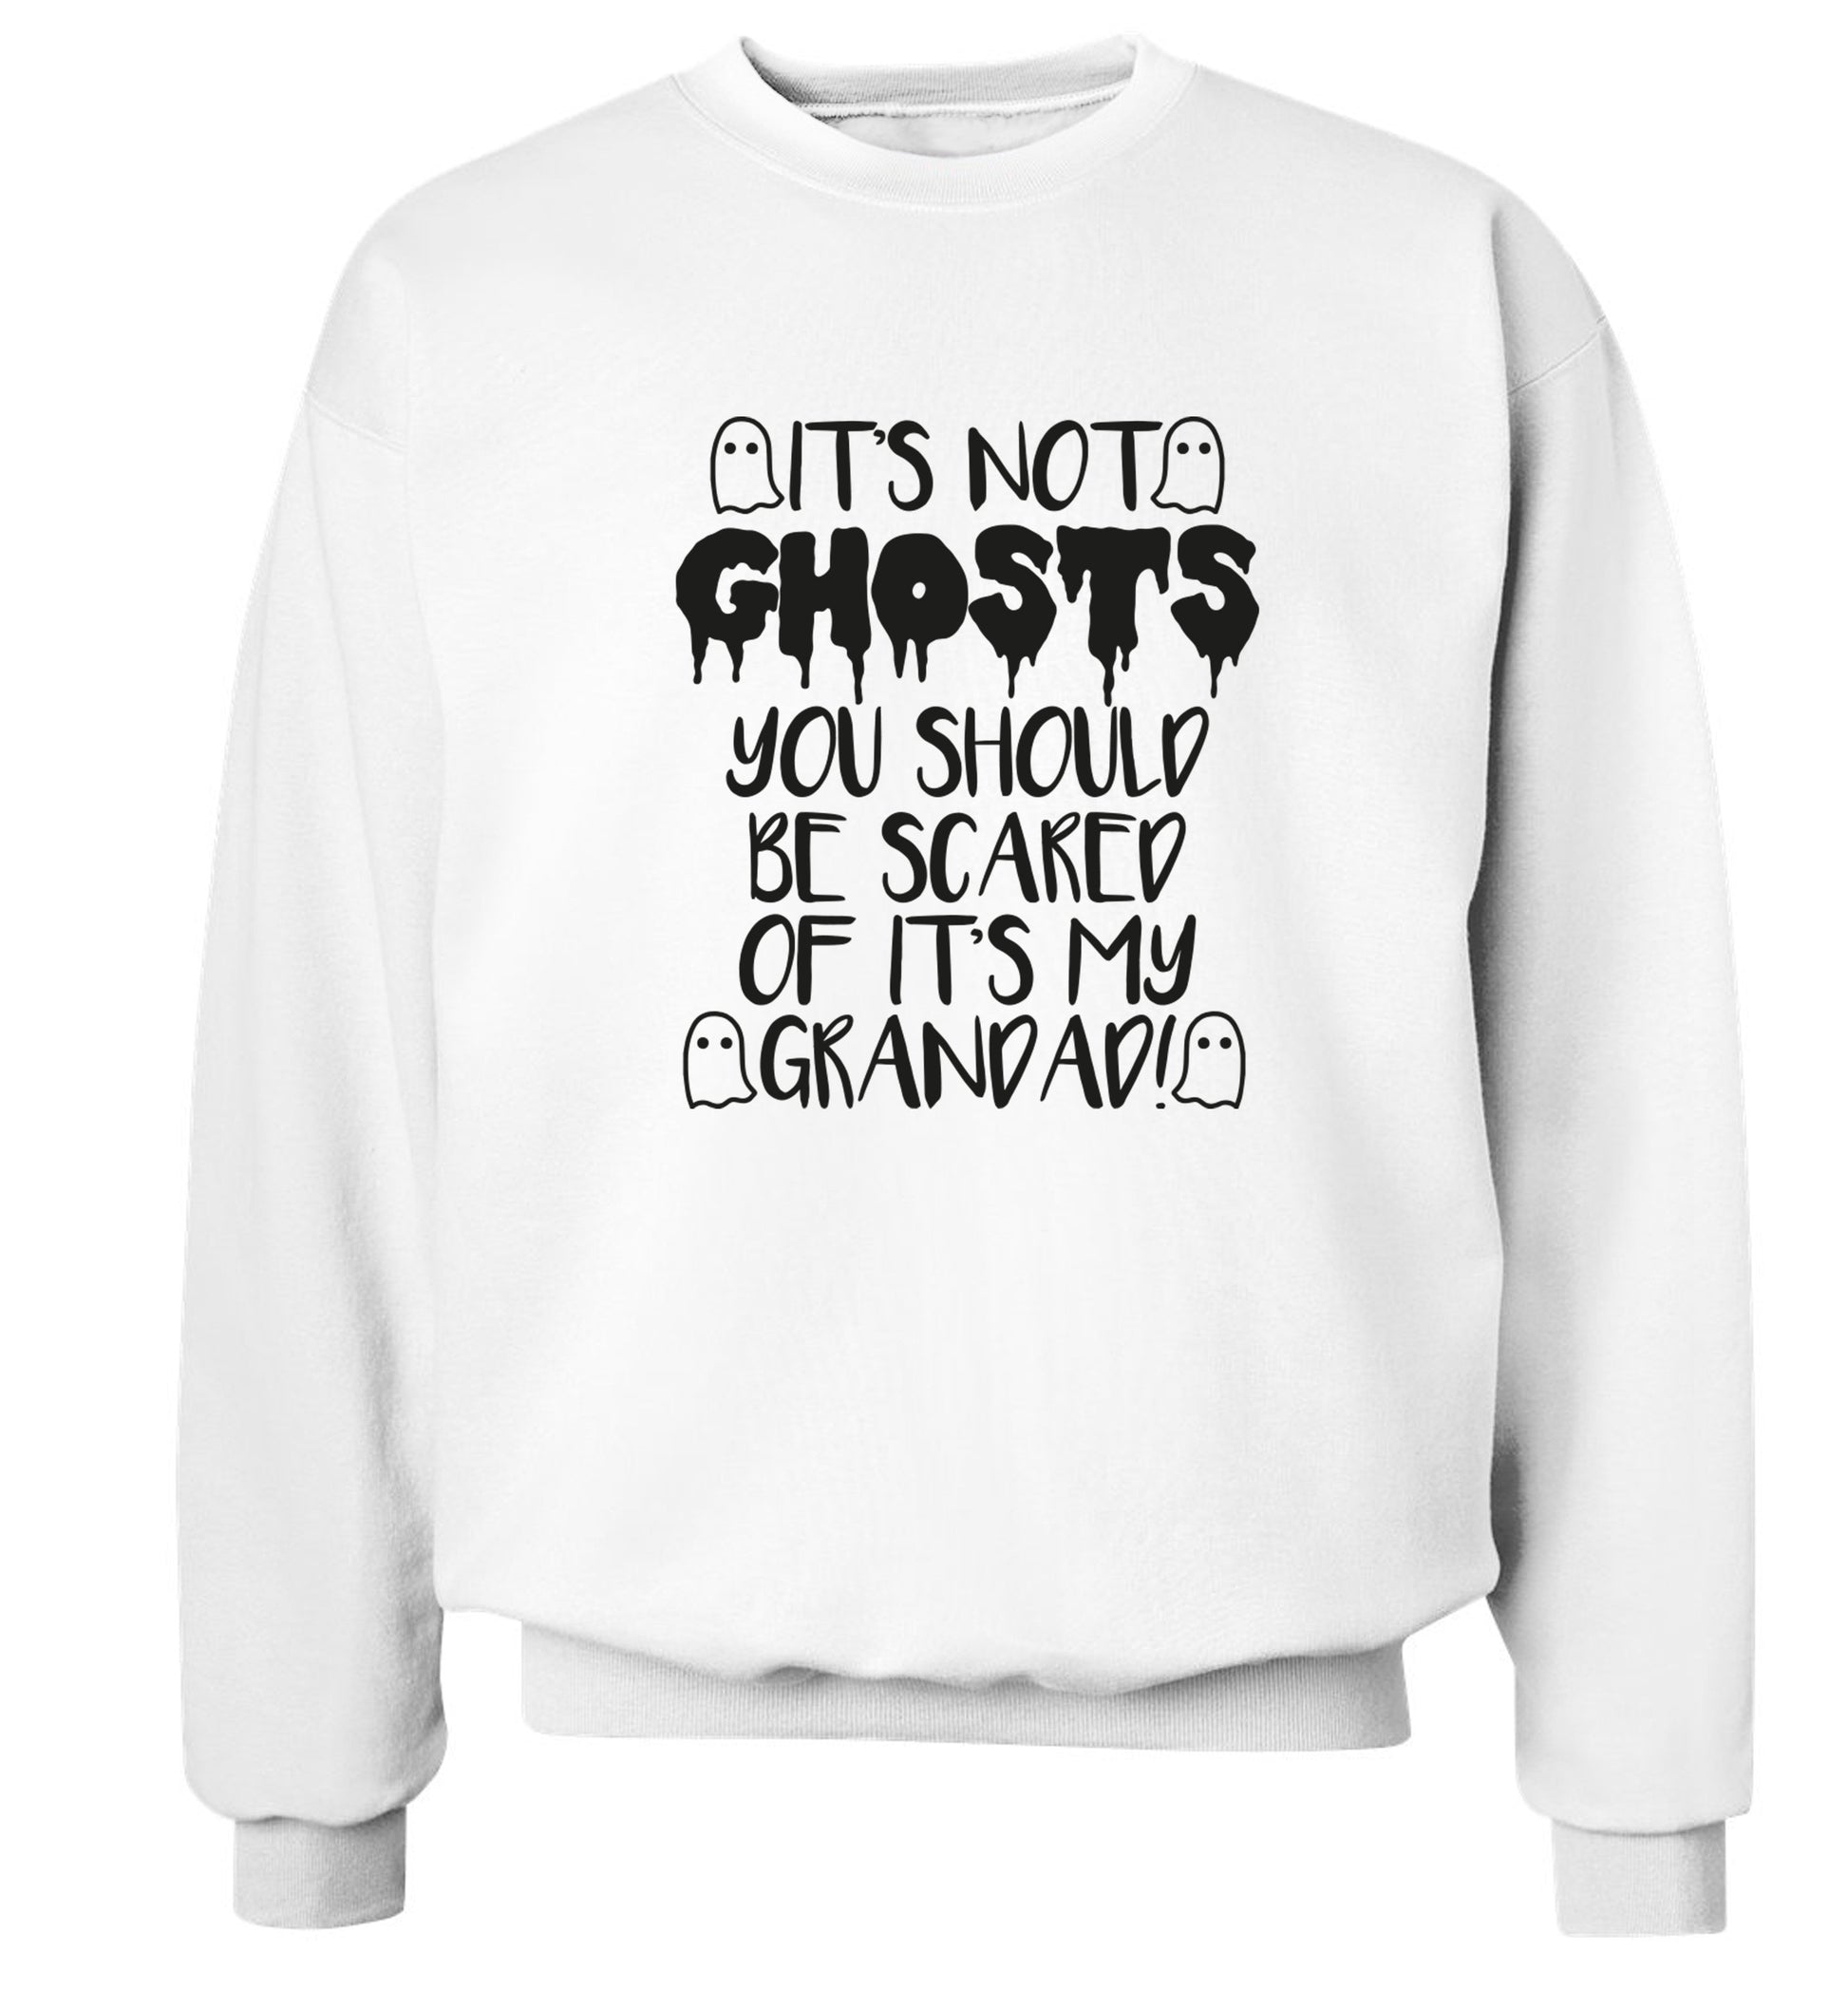 It's not ghosts you should be scared of it's my grandad! Adult's unisex white Sweater 2XL